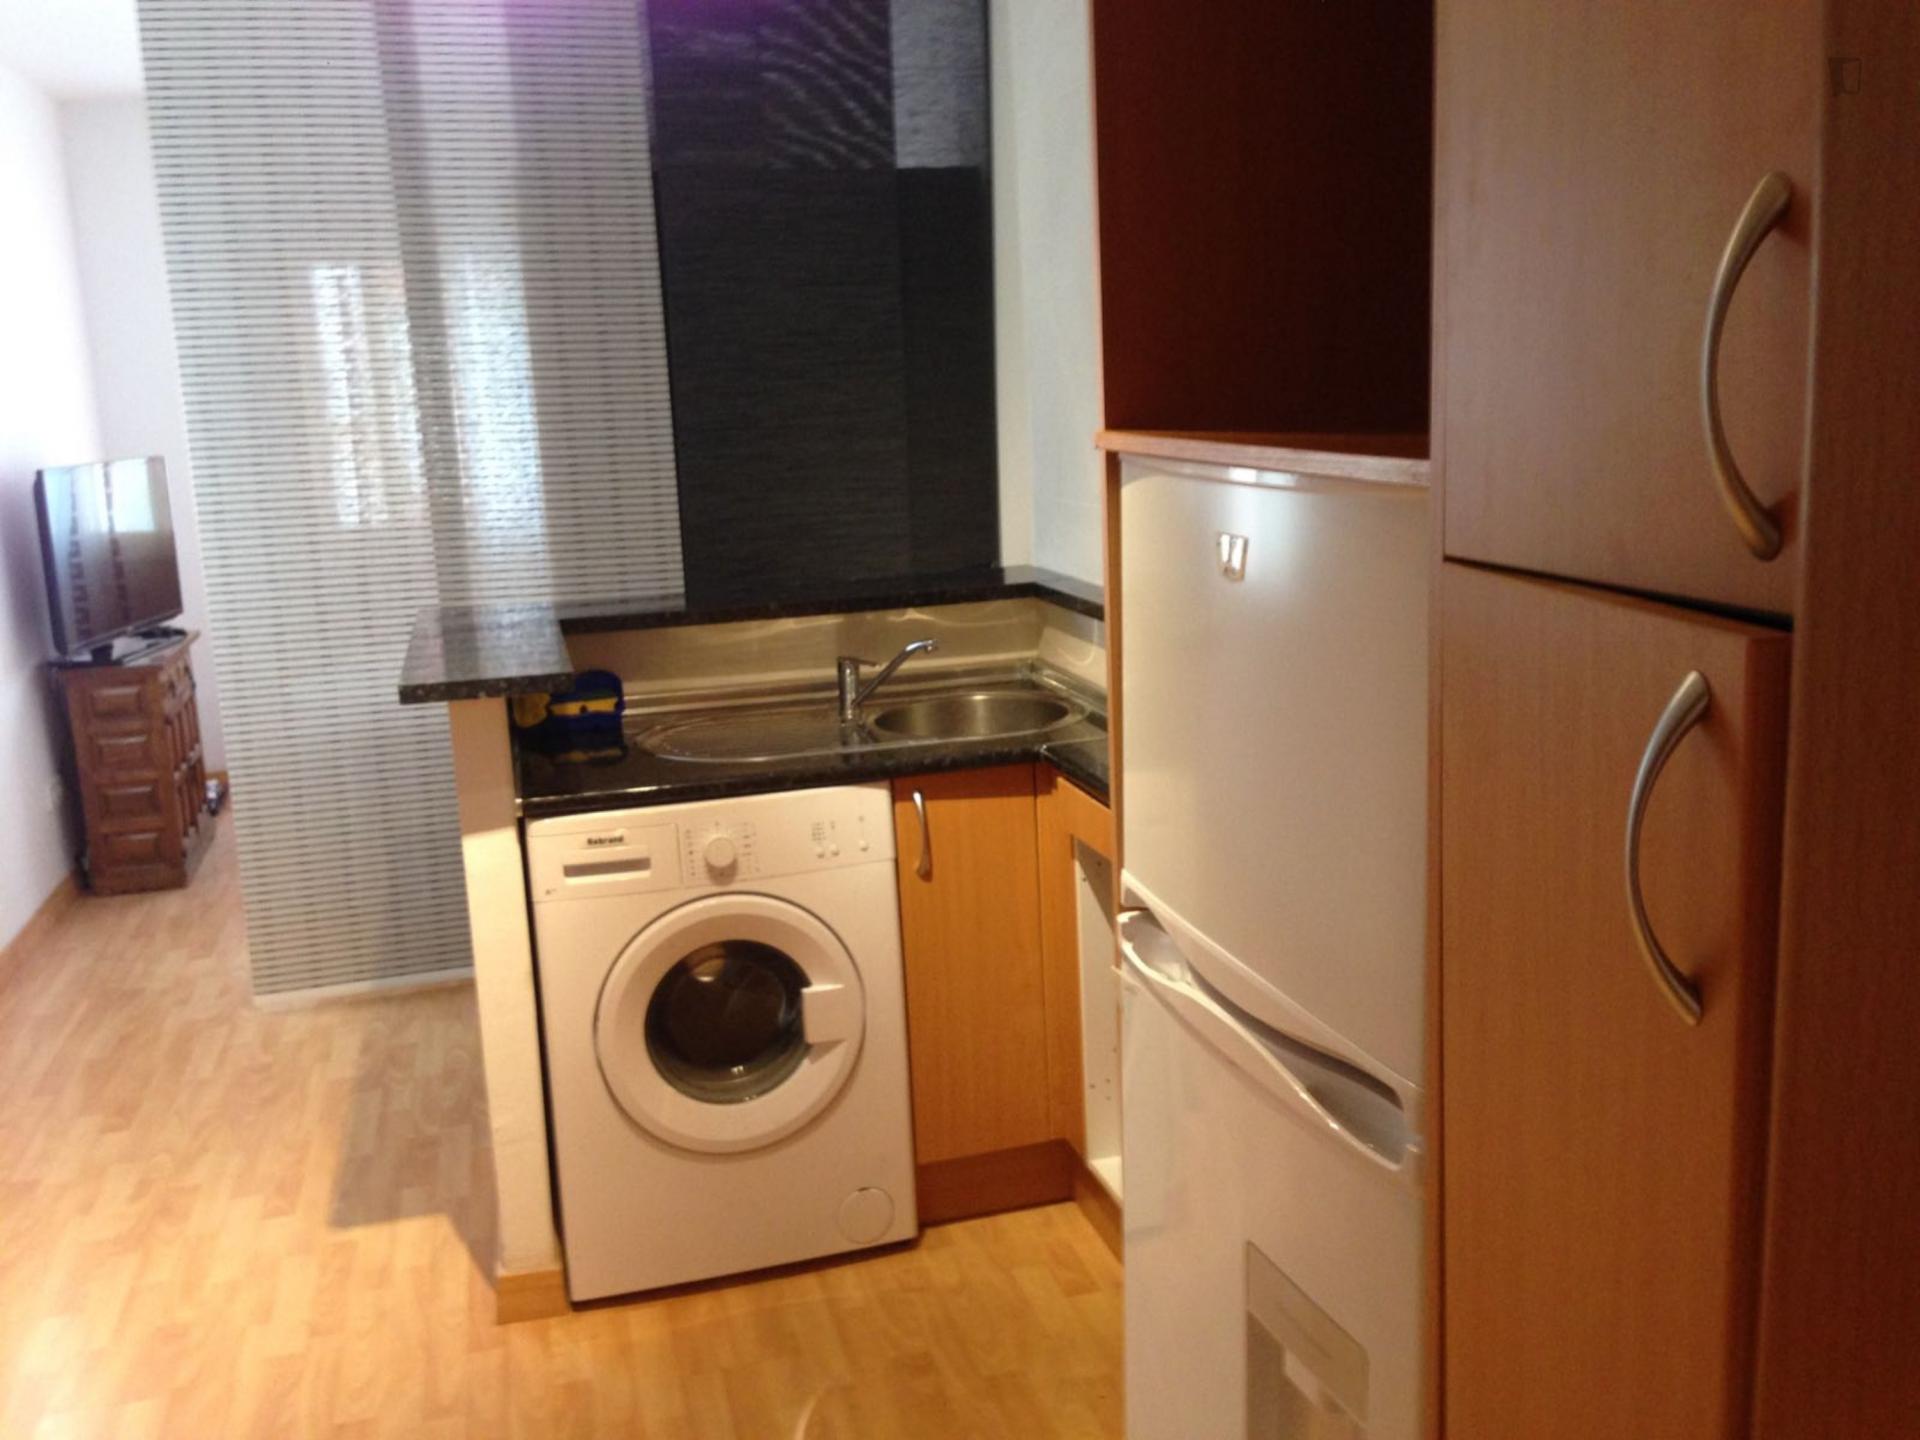 Egas- Flat located well for expats in Malaga